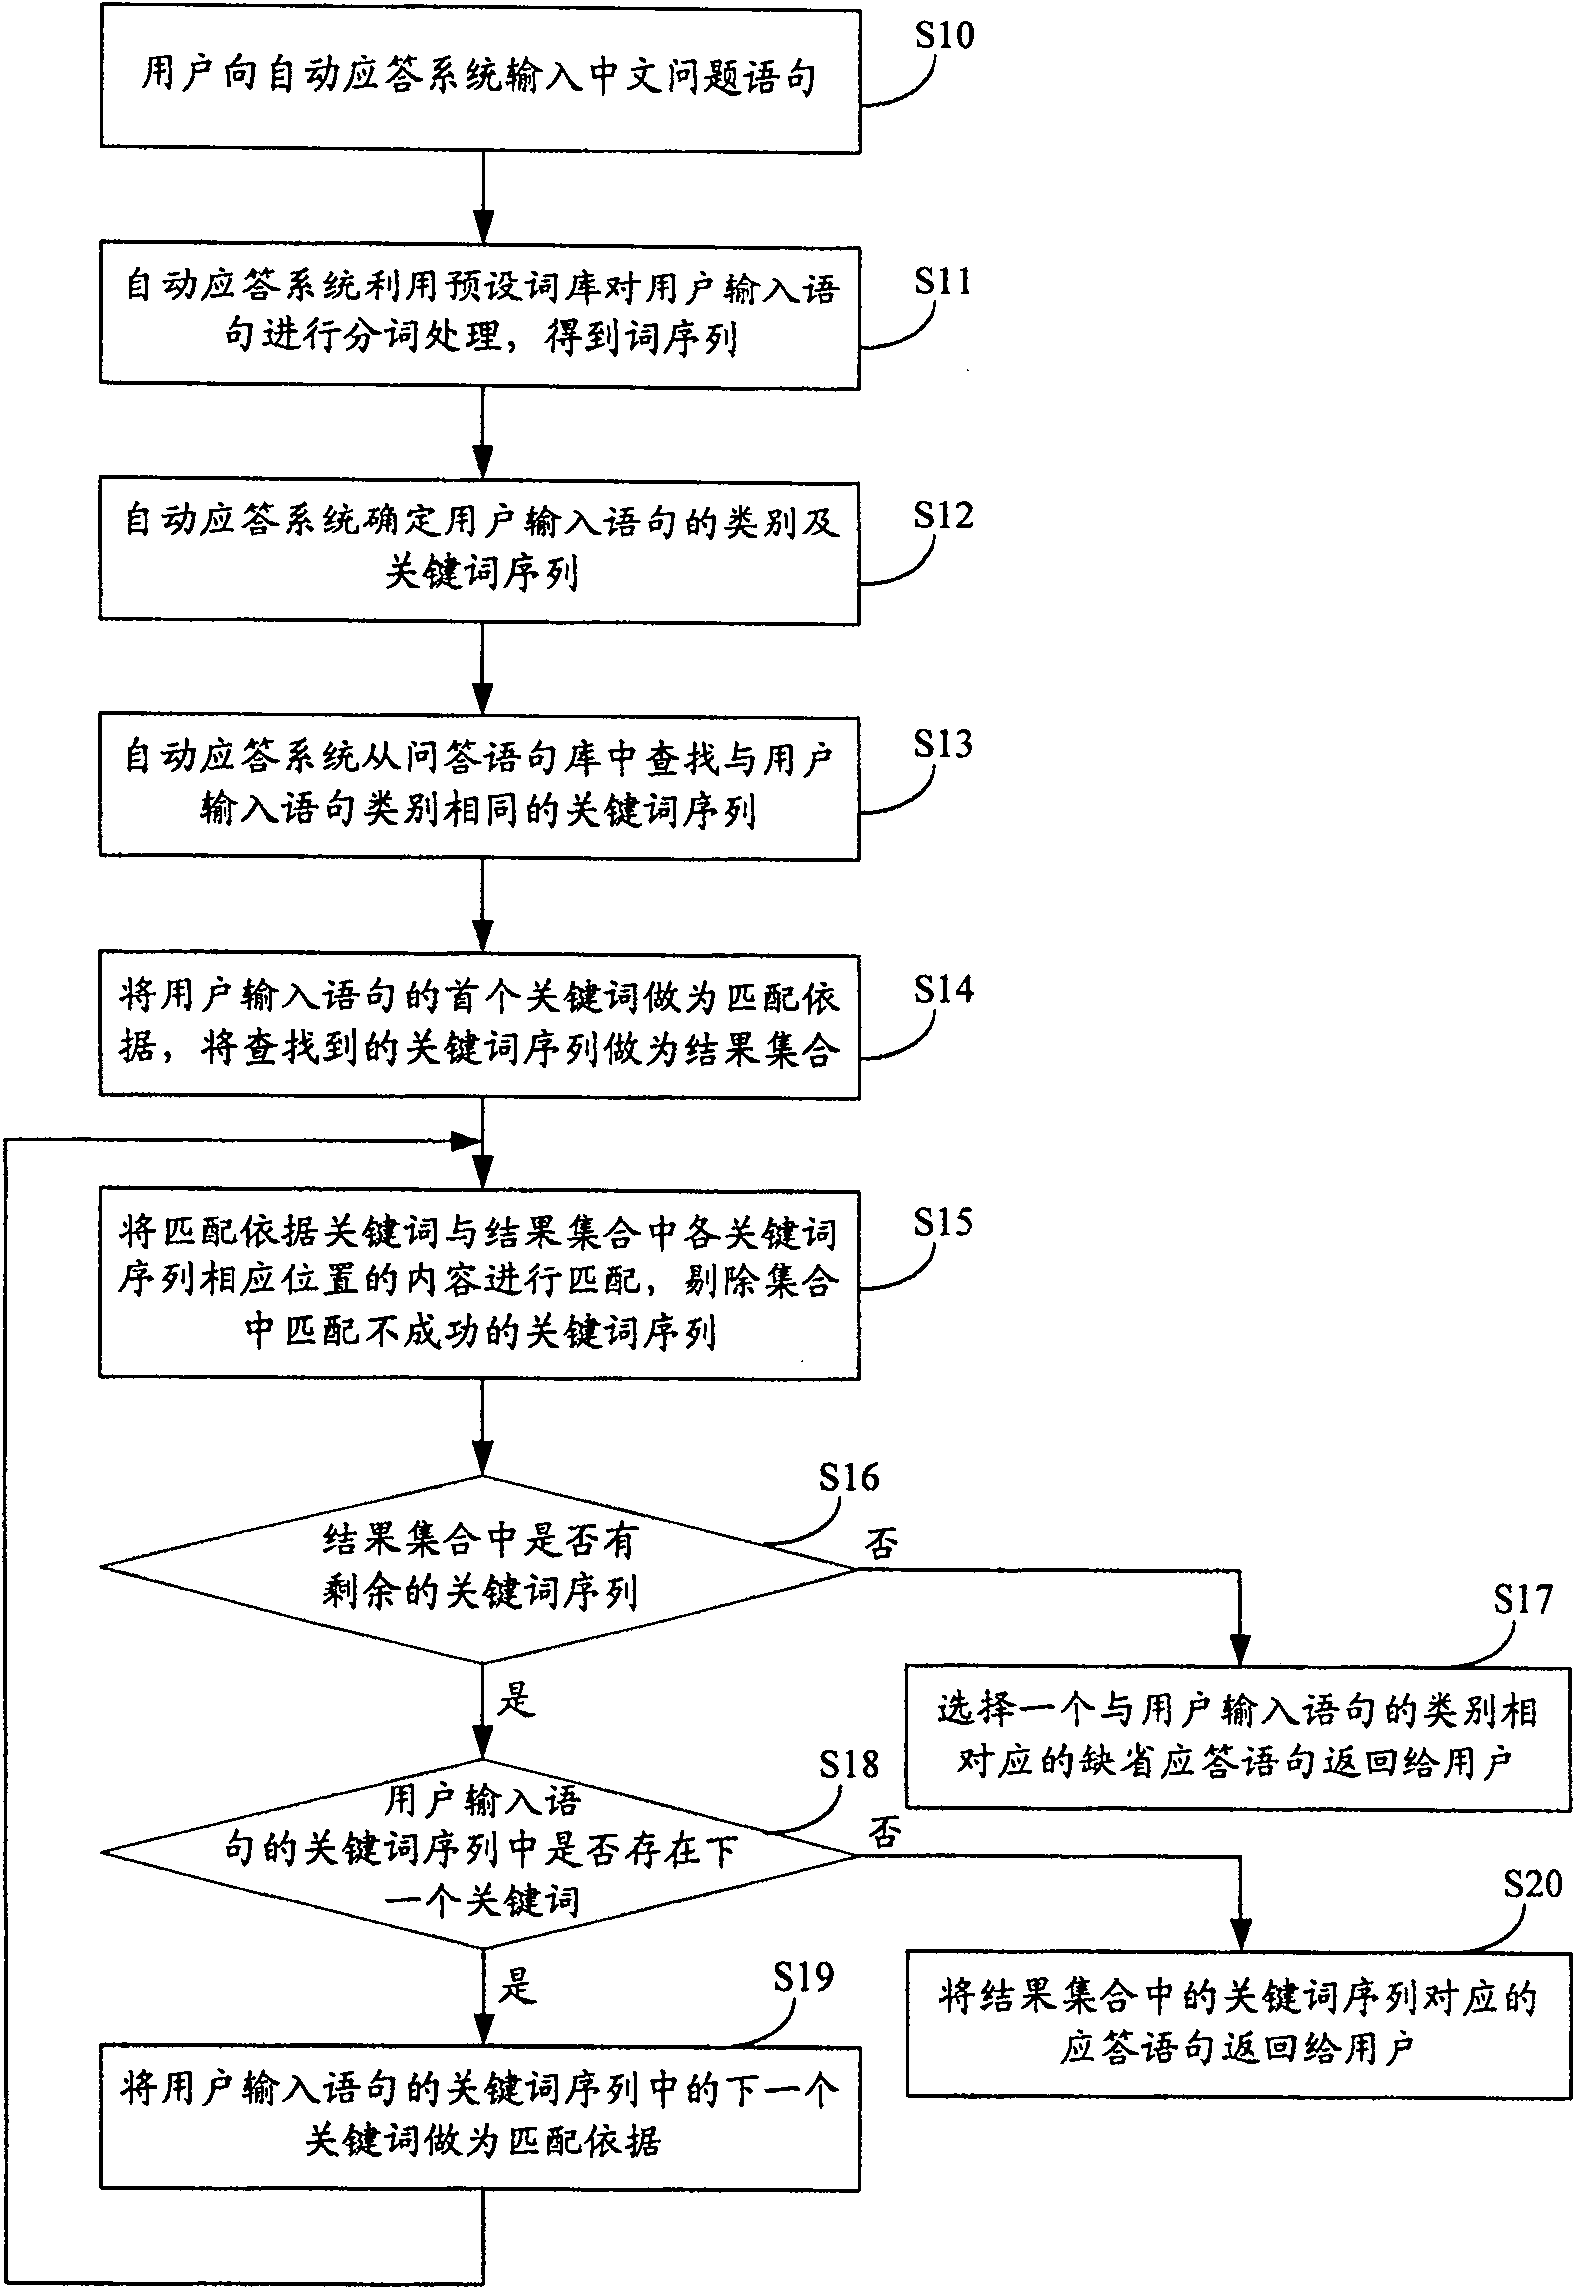 Chinese auto-answer method and system